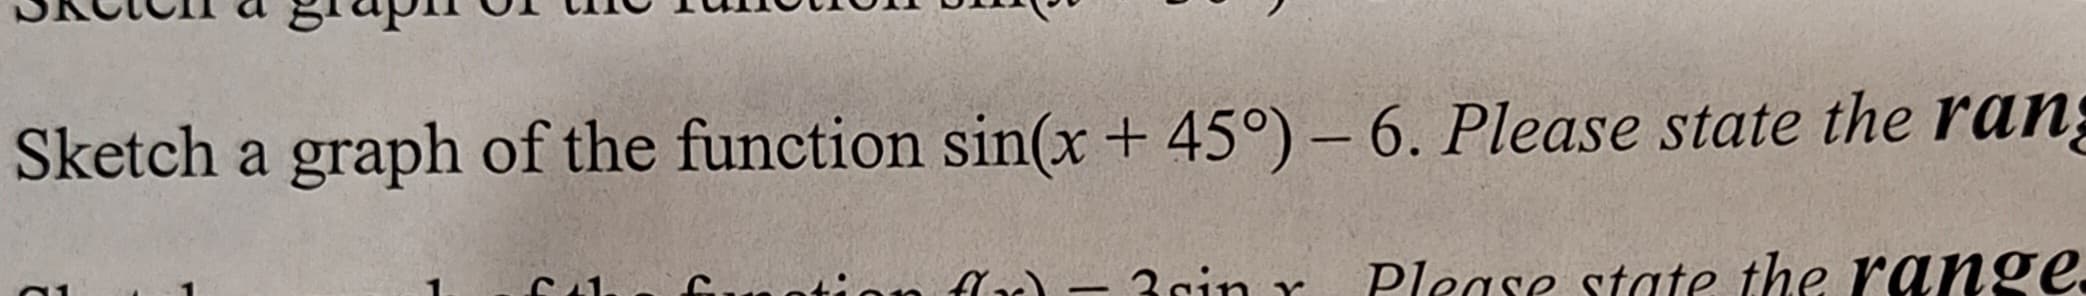 Sketch a graph of the function sin(x + 45°) - 6. Please state the rang
the fation flx) - 3sin r Please state the range.
1